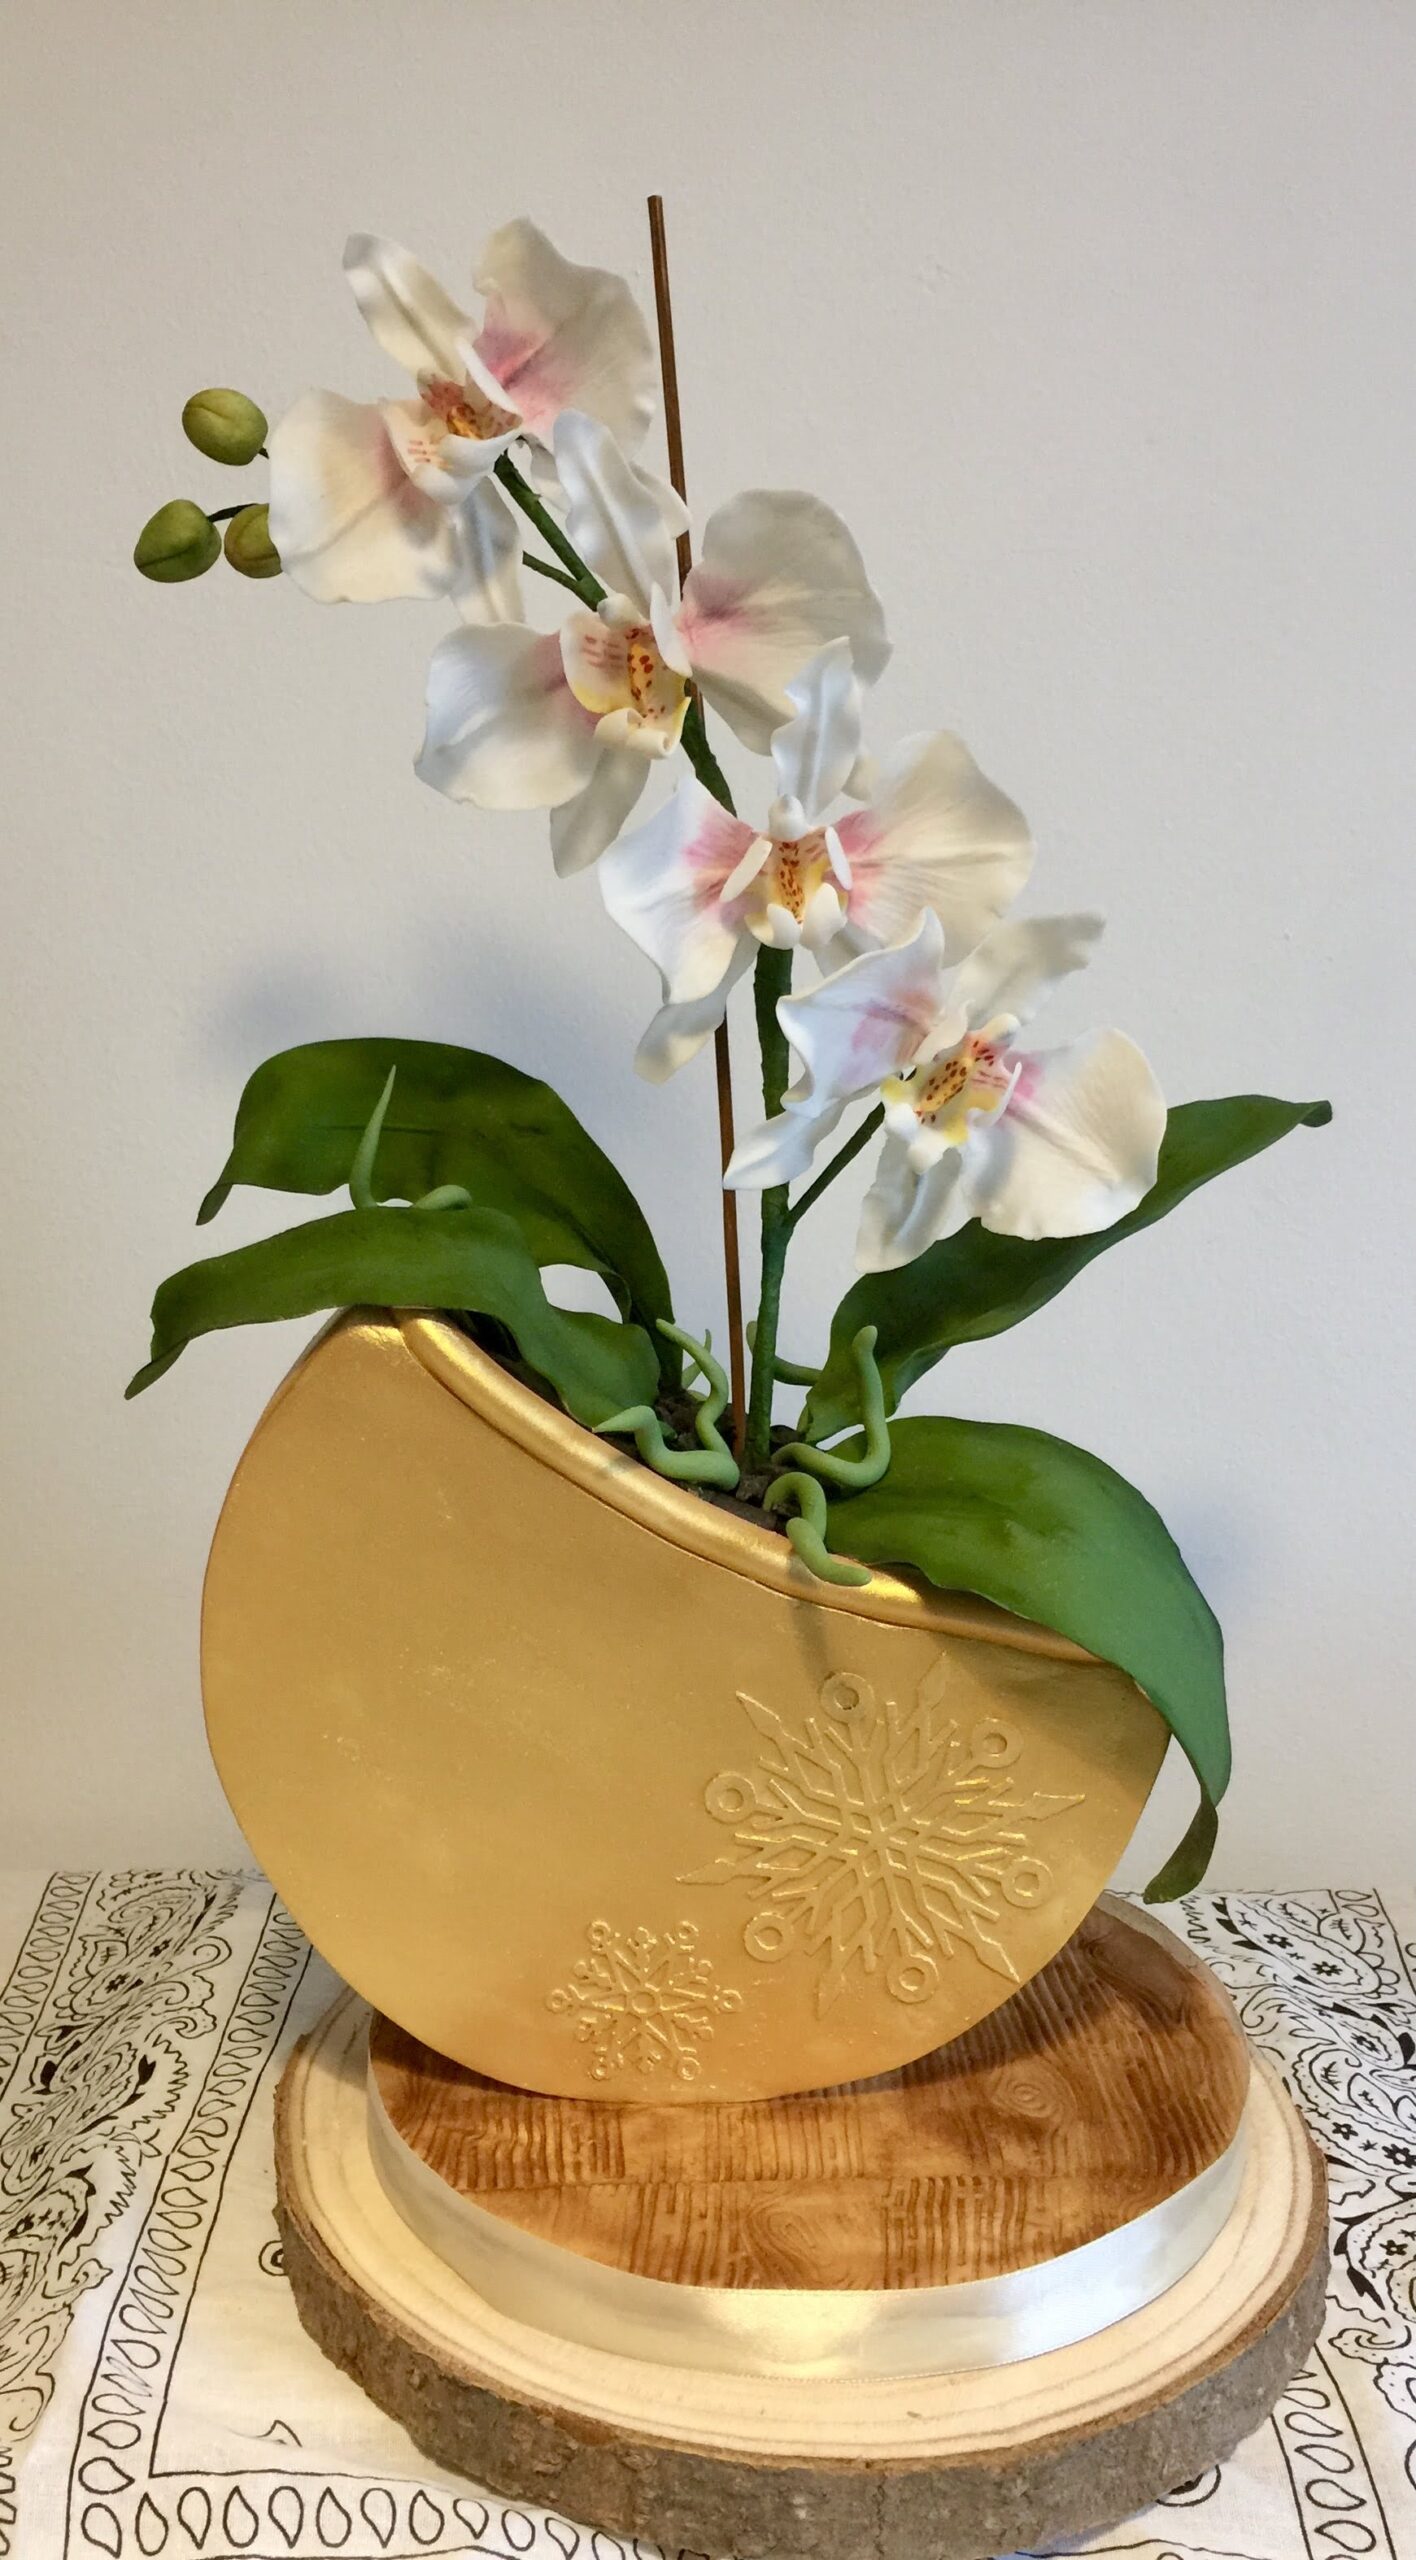 Sue Power - Moth Orchid flowers & leaves - February 2022